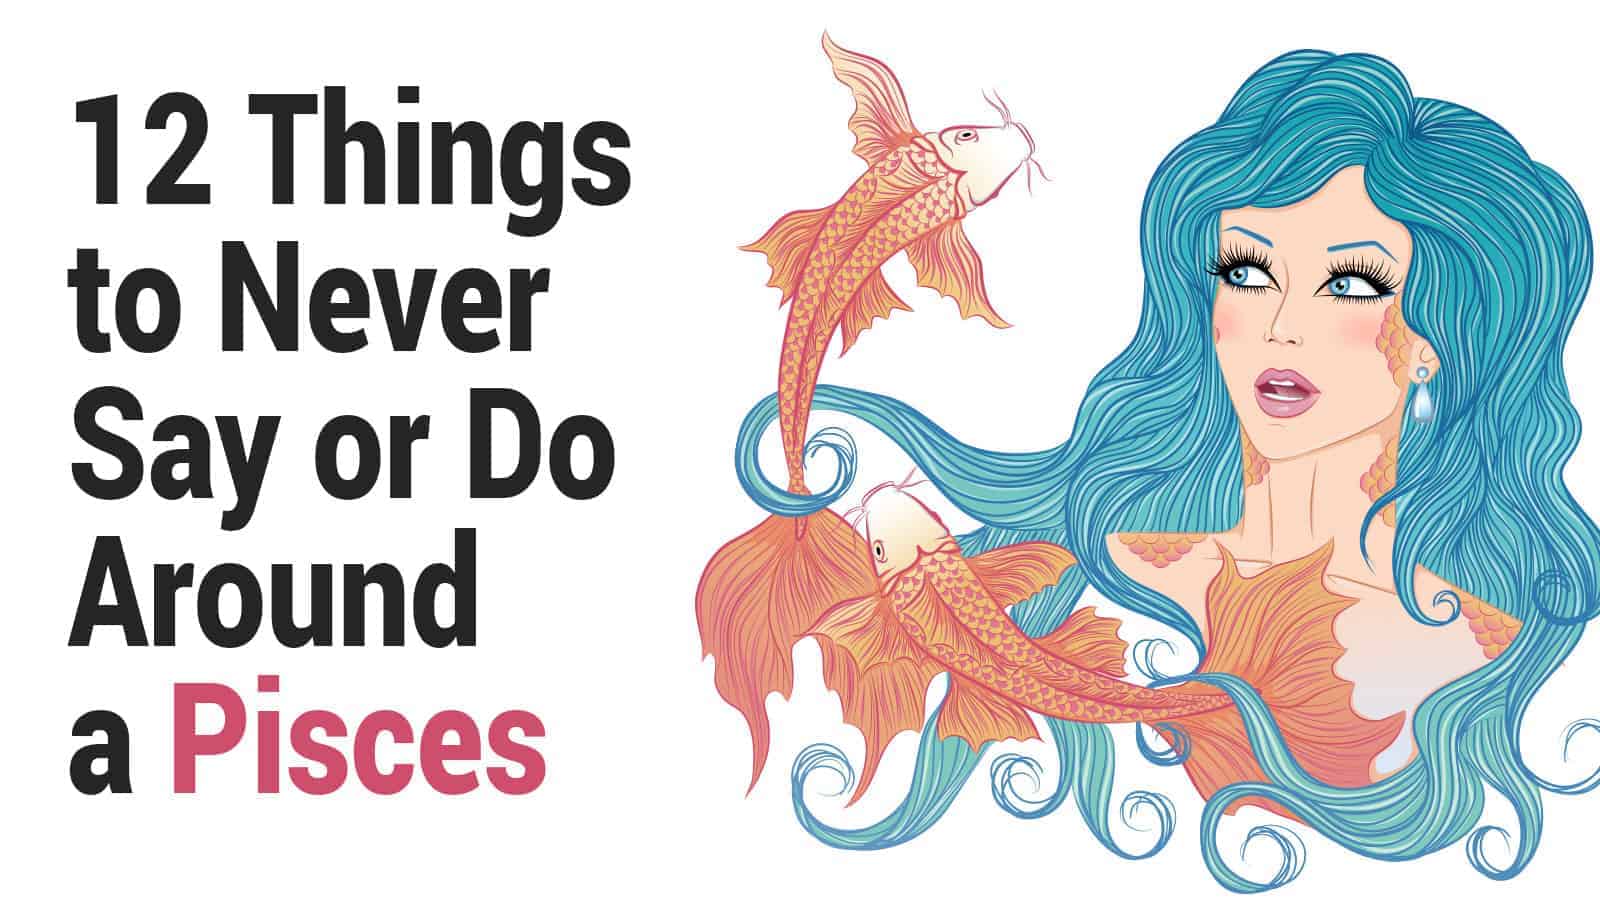 12 Things to Never Say or Do Around a Pisces